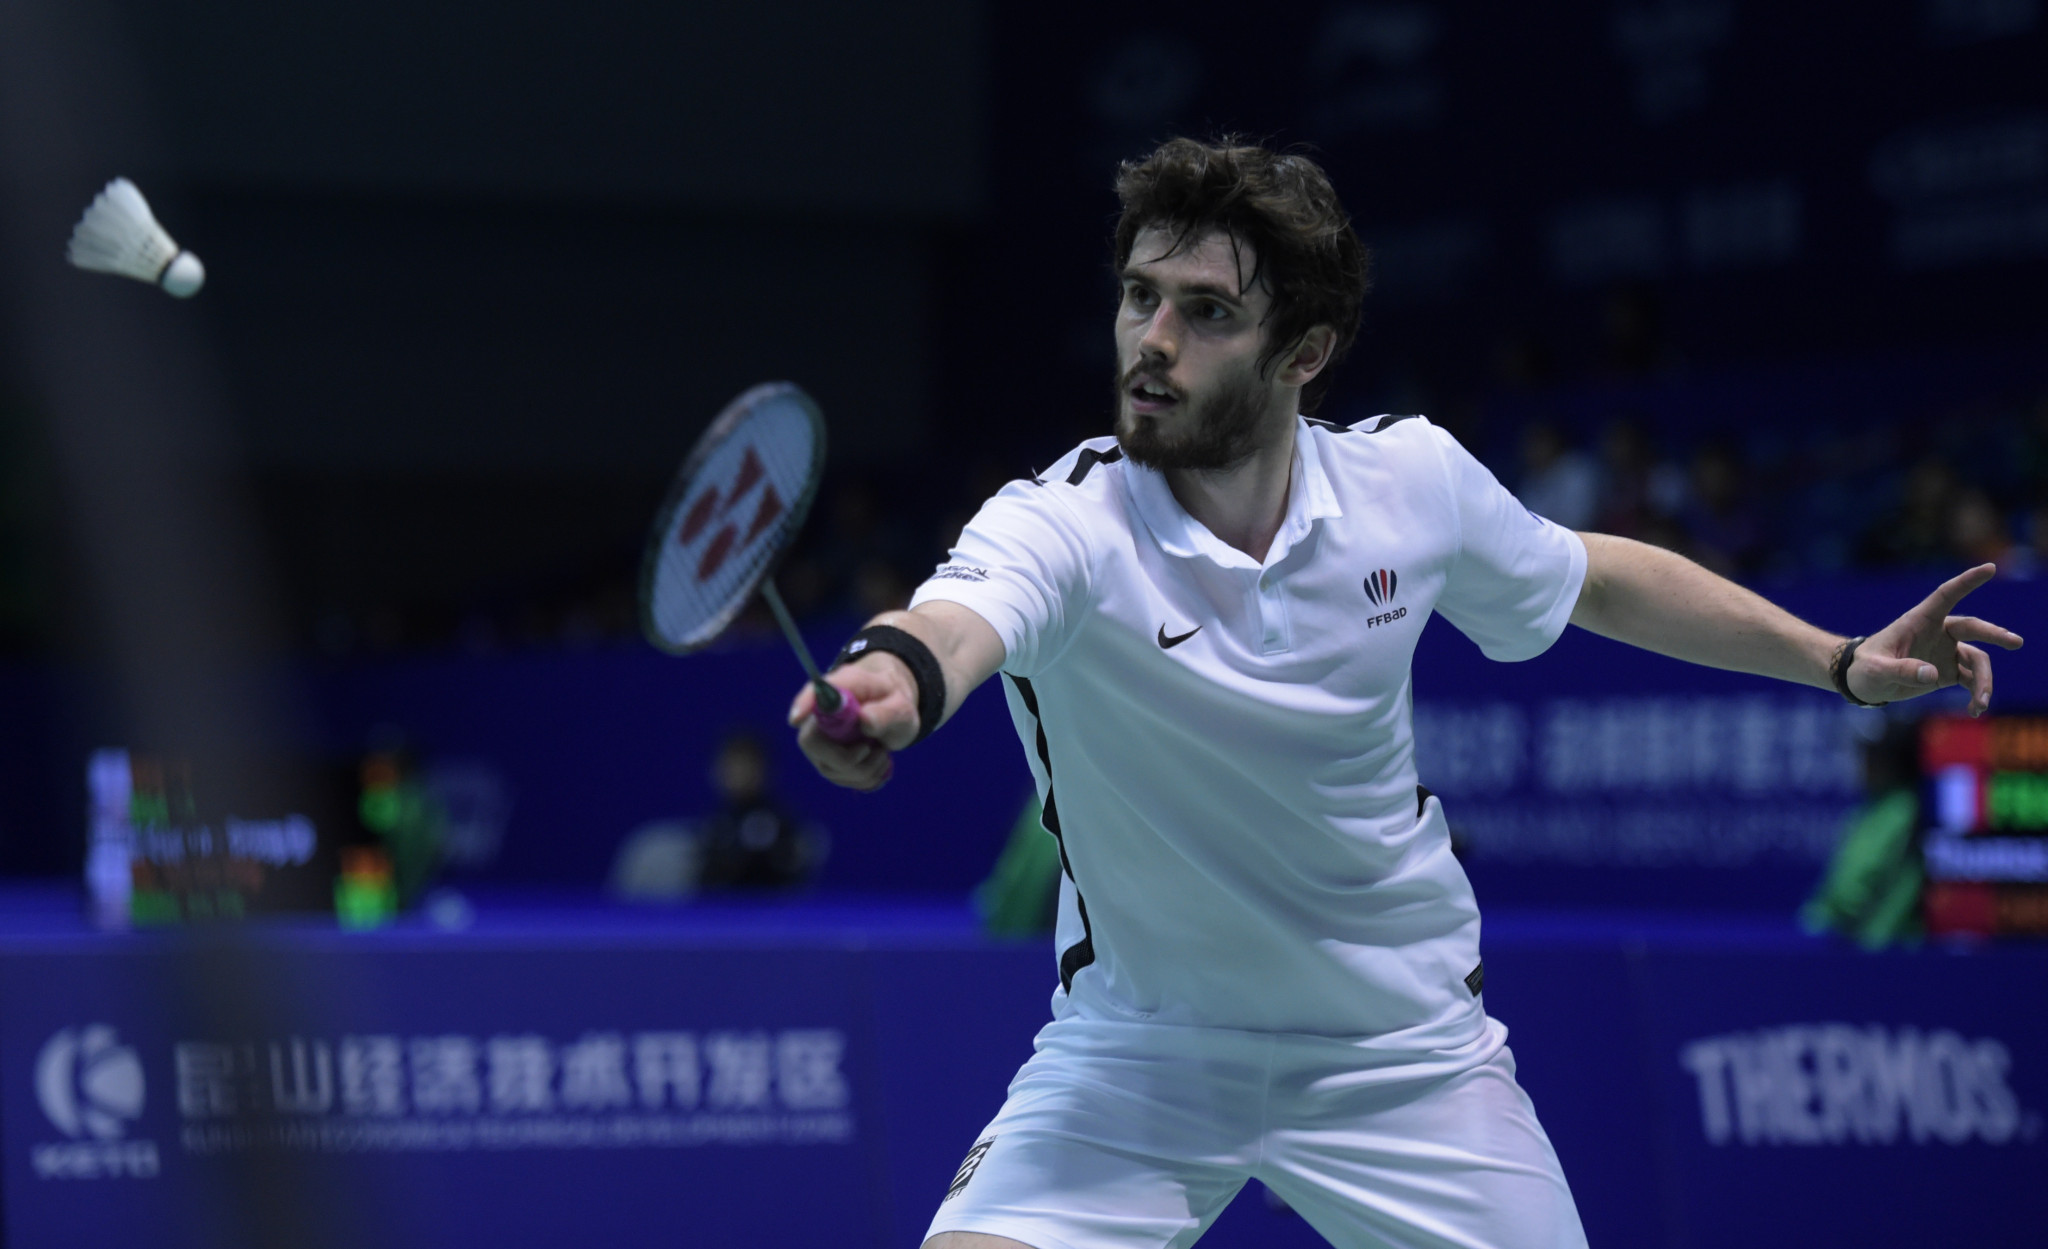 France's Thomas Rouxel will now play Buenos Aires 2018 champion Li Shifeng in the first round ©Getty Images